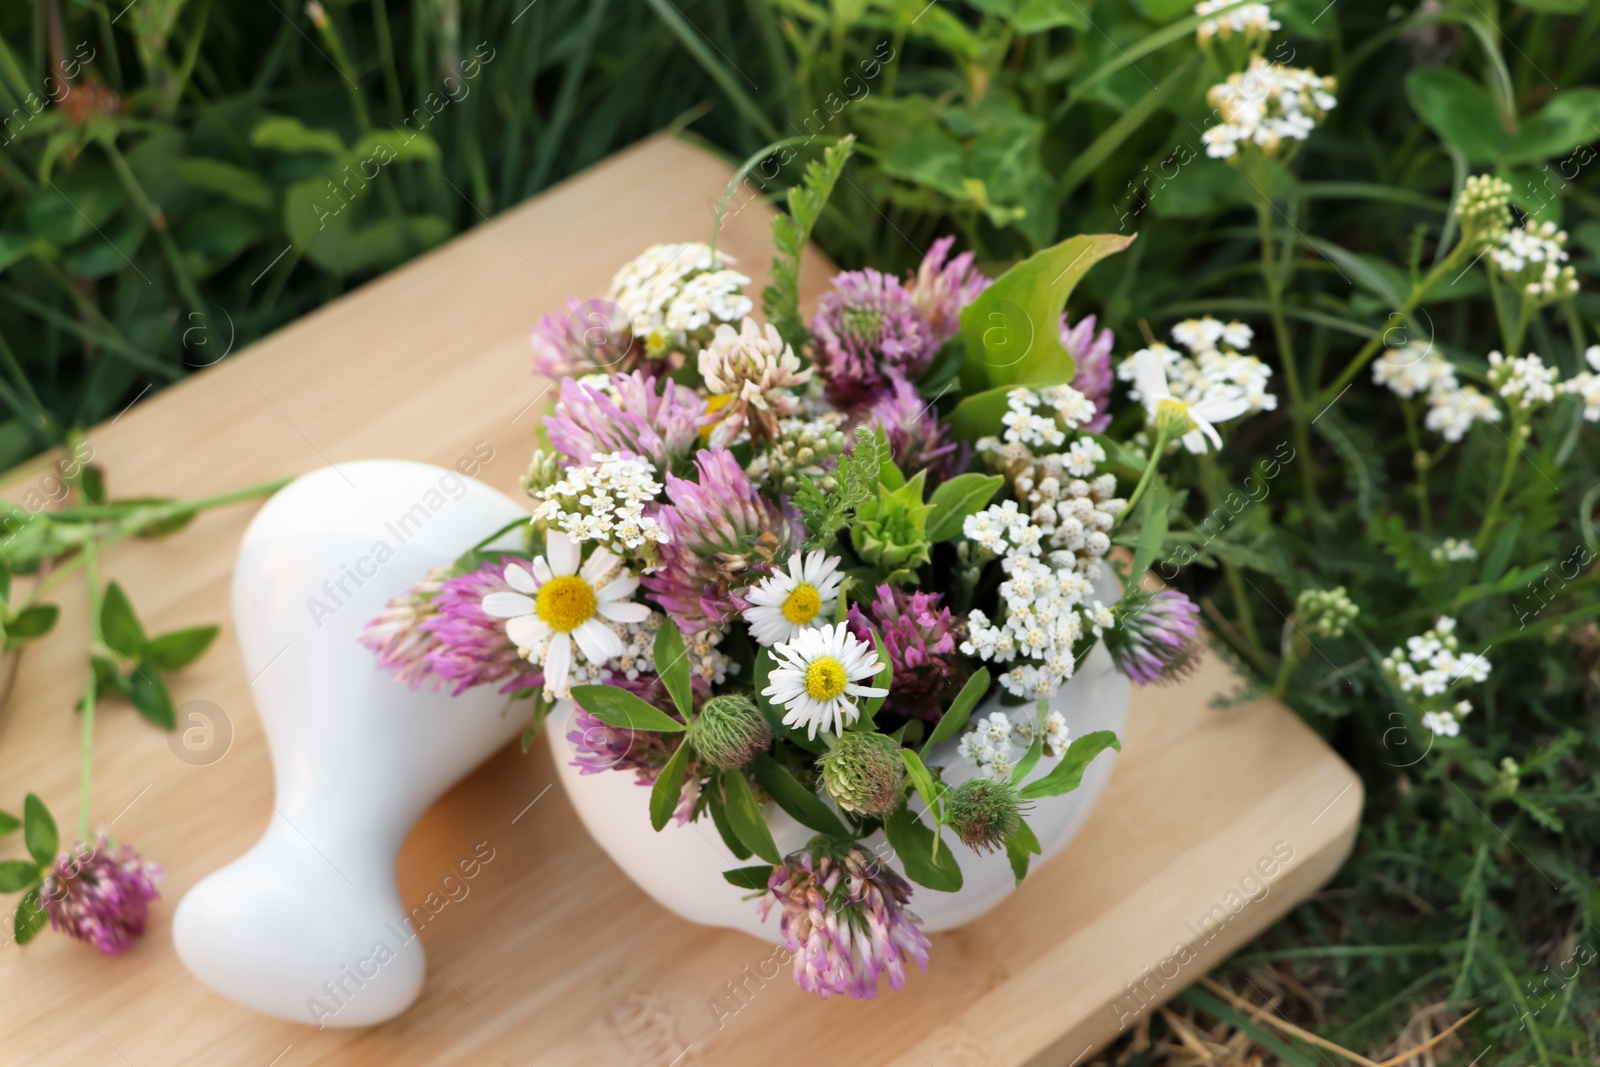 Photo of Ceramic mortar with pestle, different wildflowers and herbs on green grass outdoors